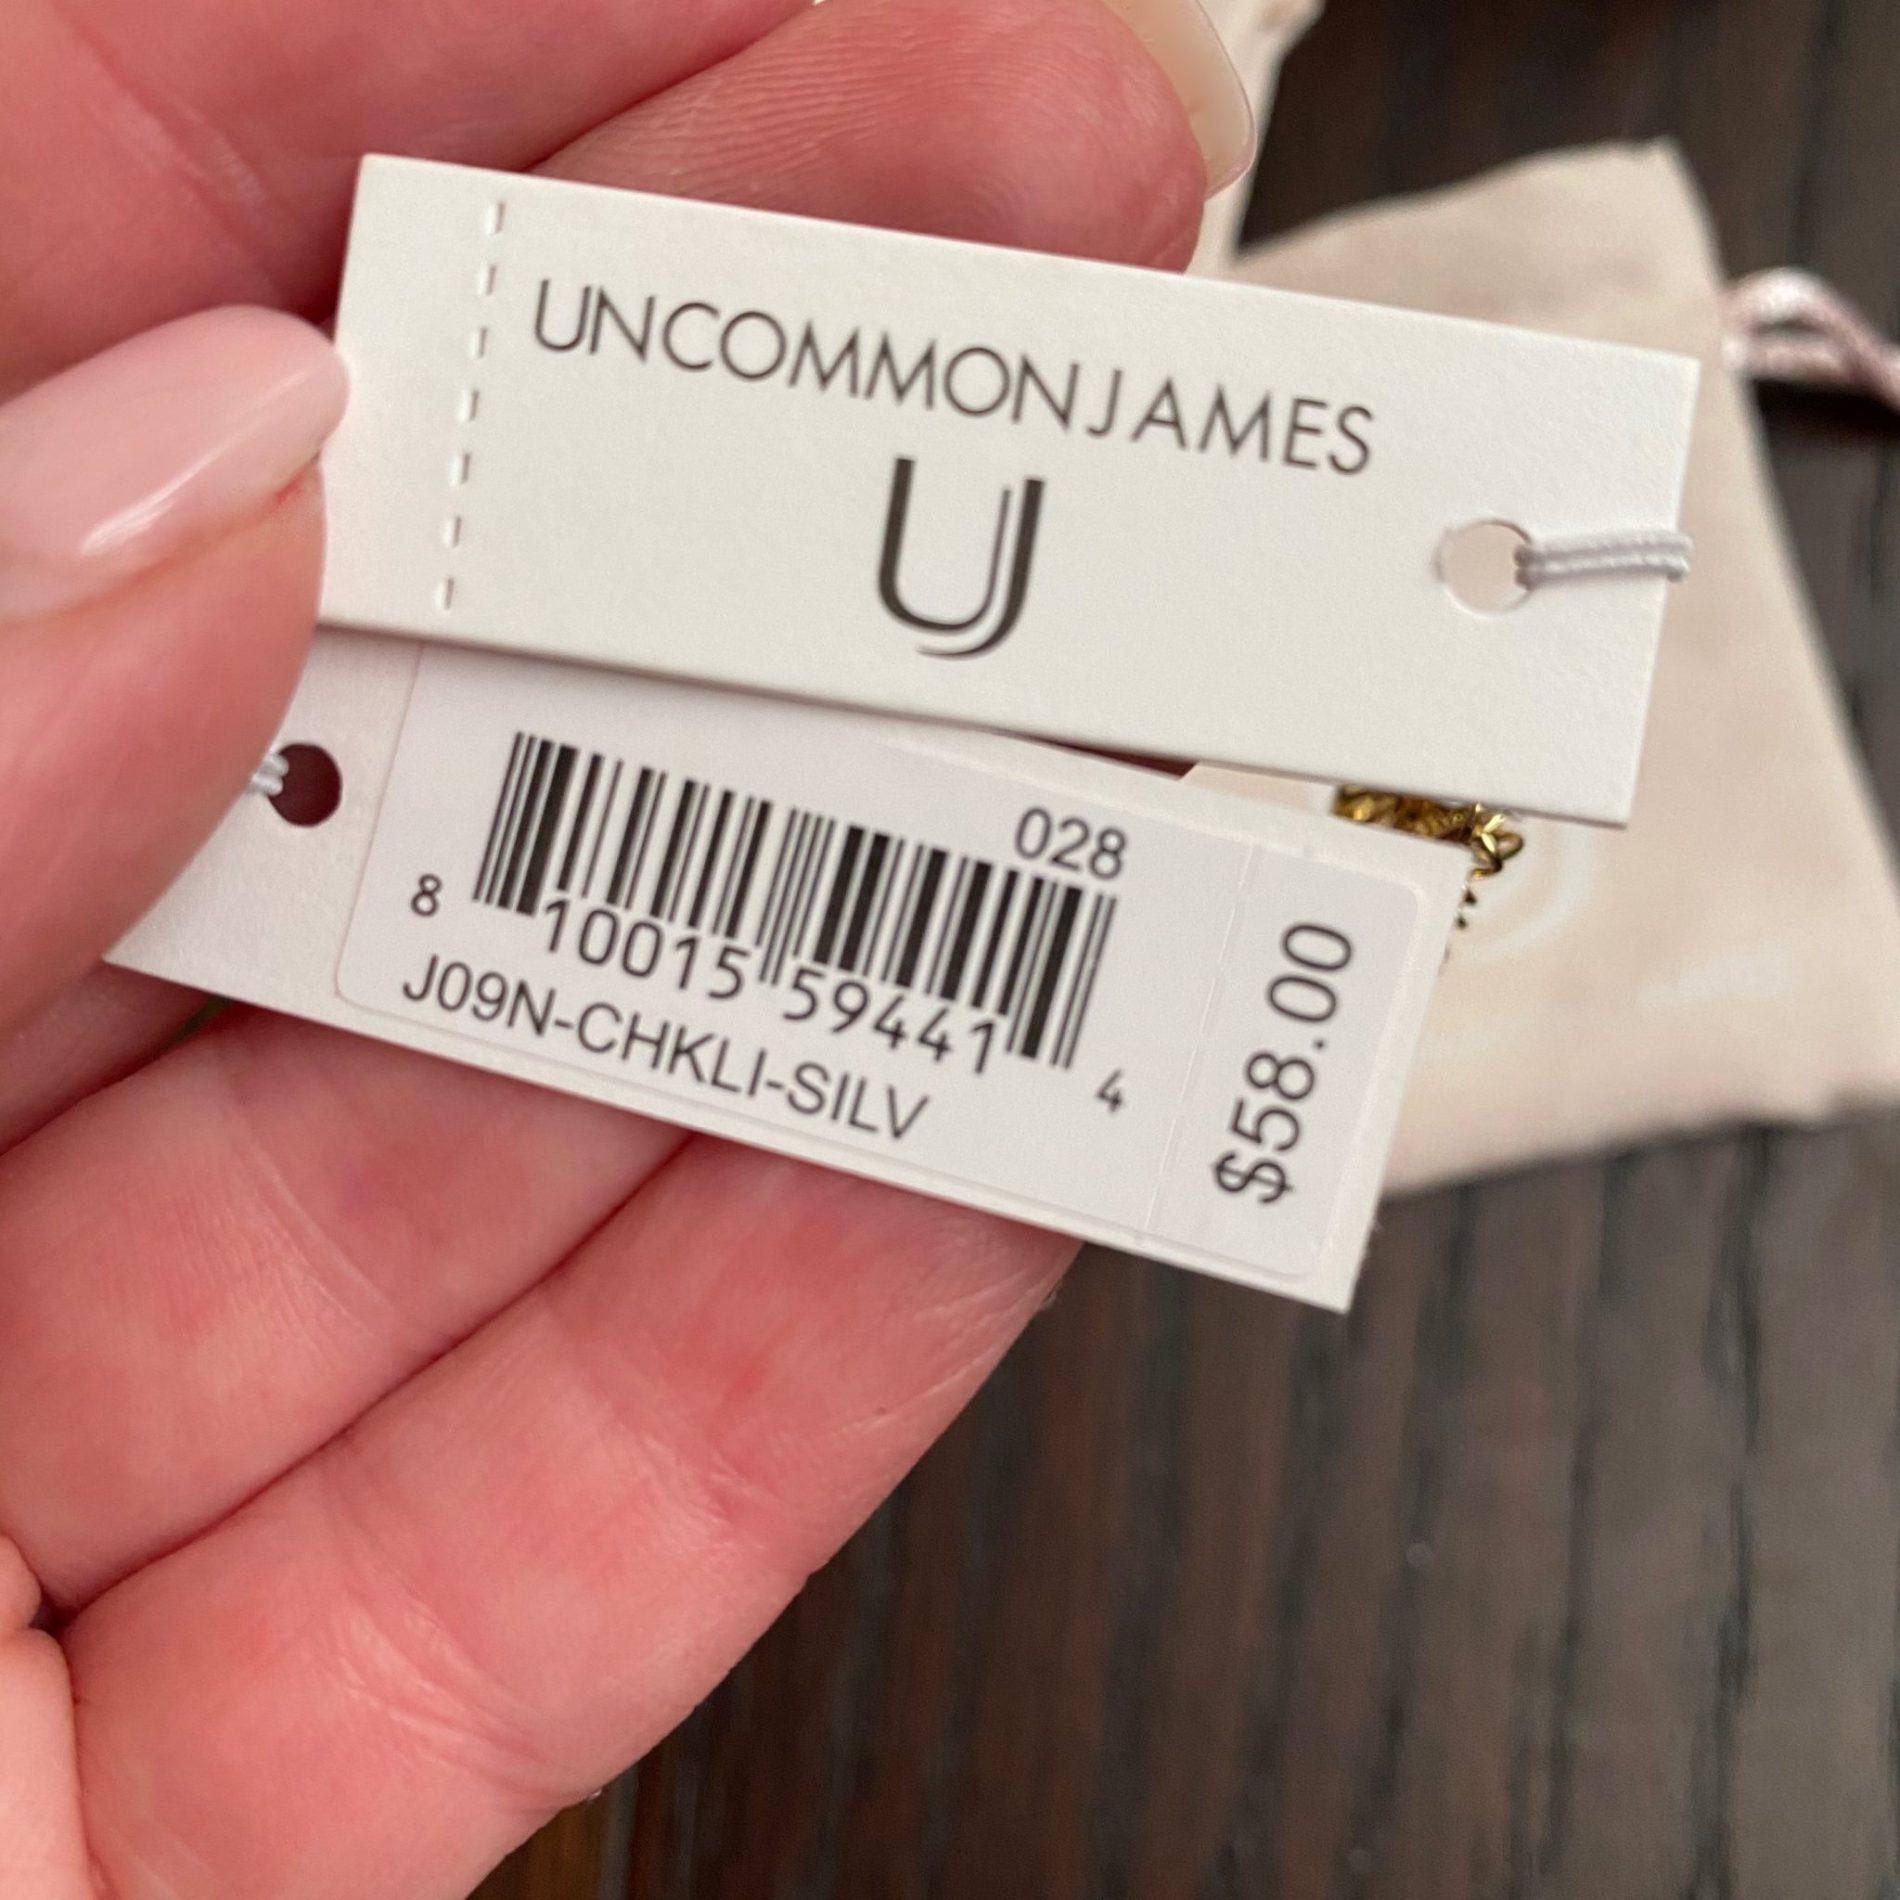 Uncommon James Monthly Mystery Items Review - January 2021 ...